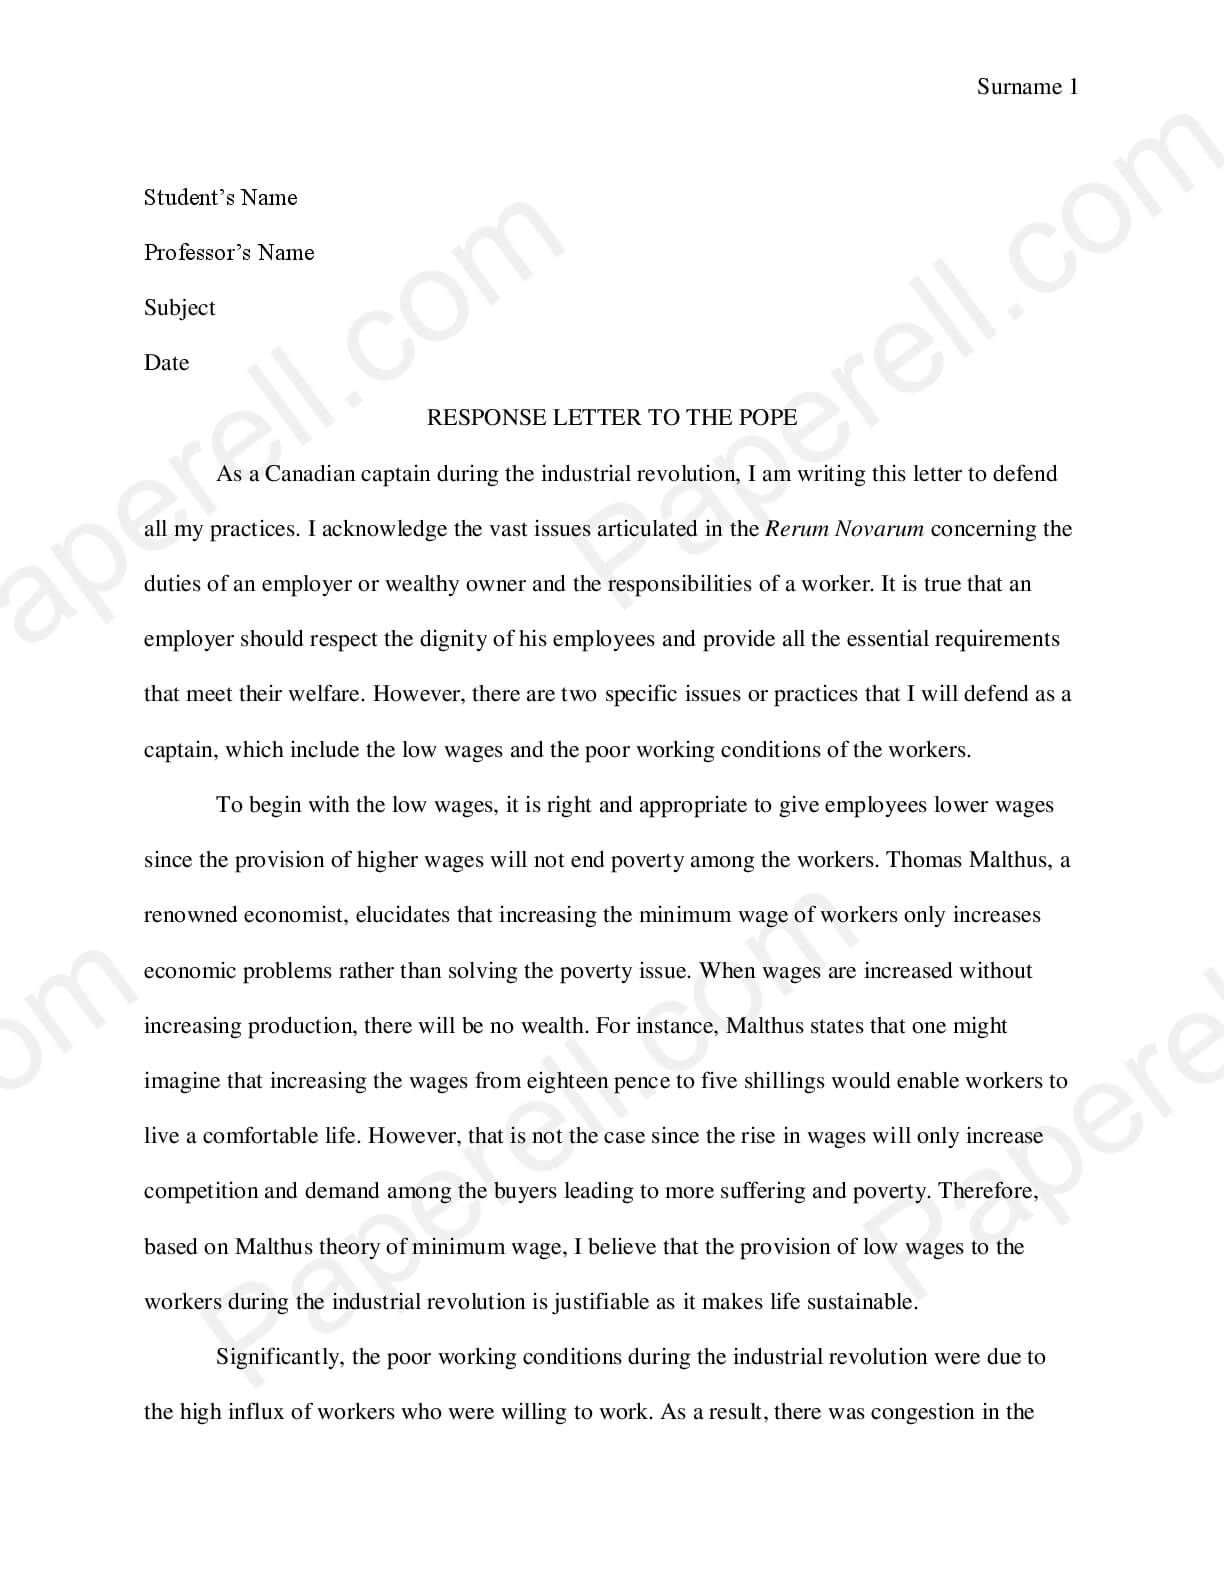 thesis based paper